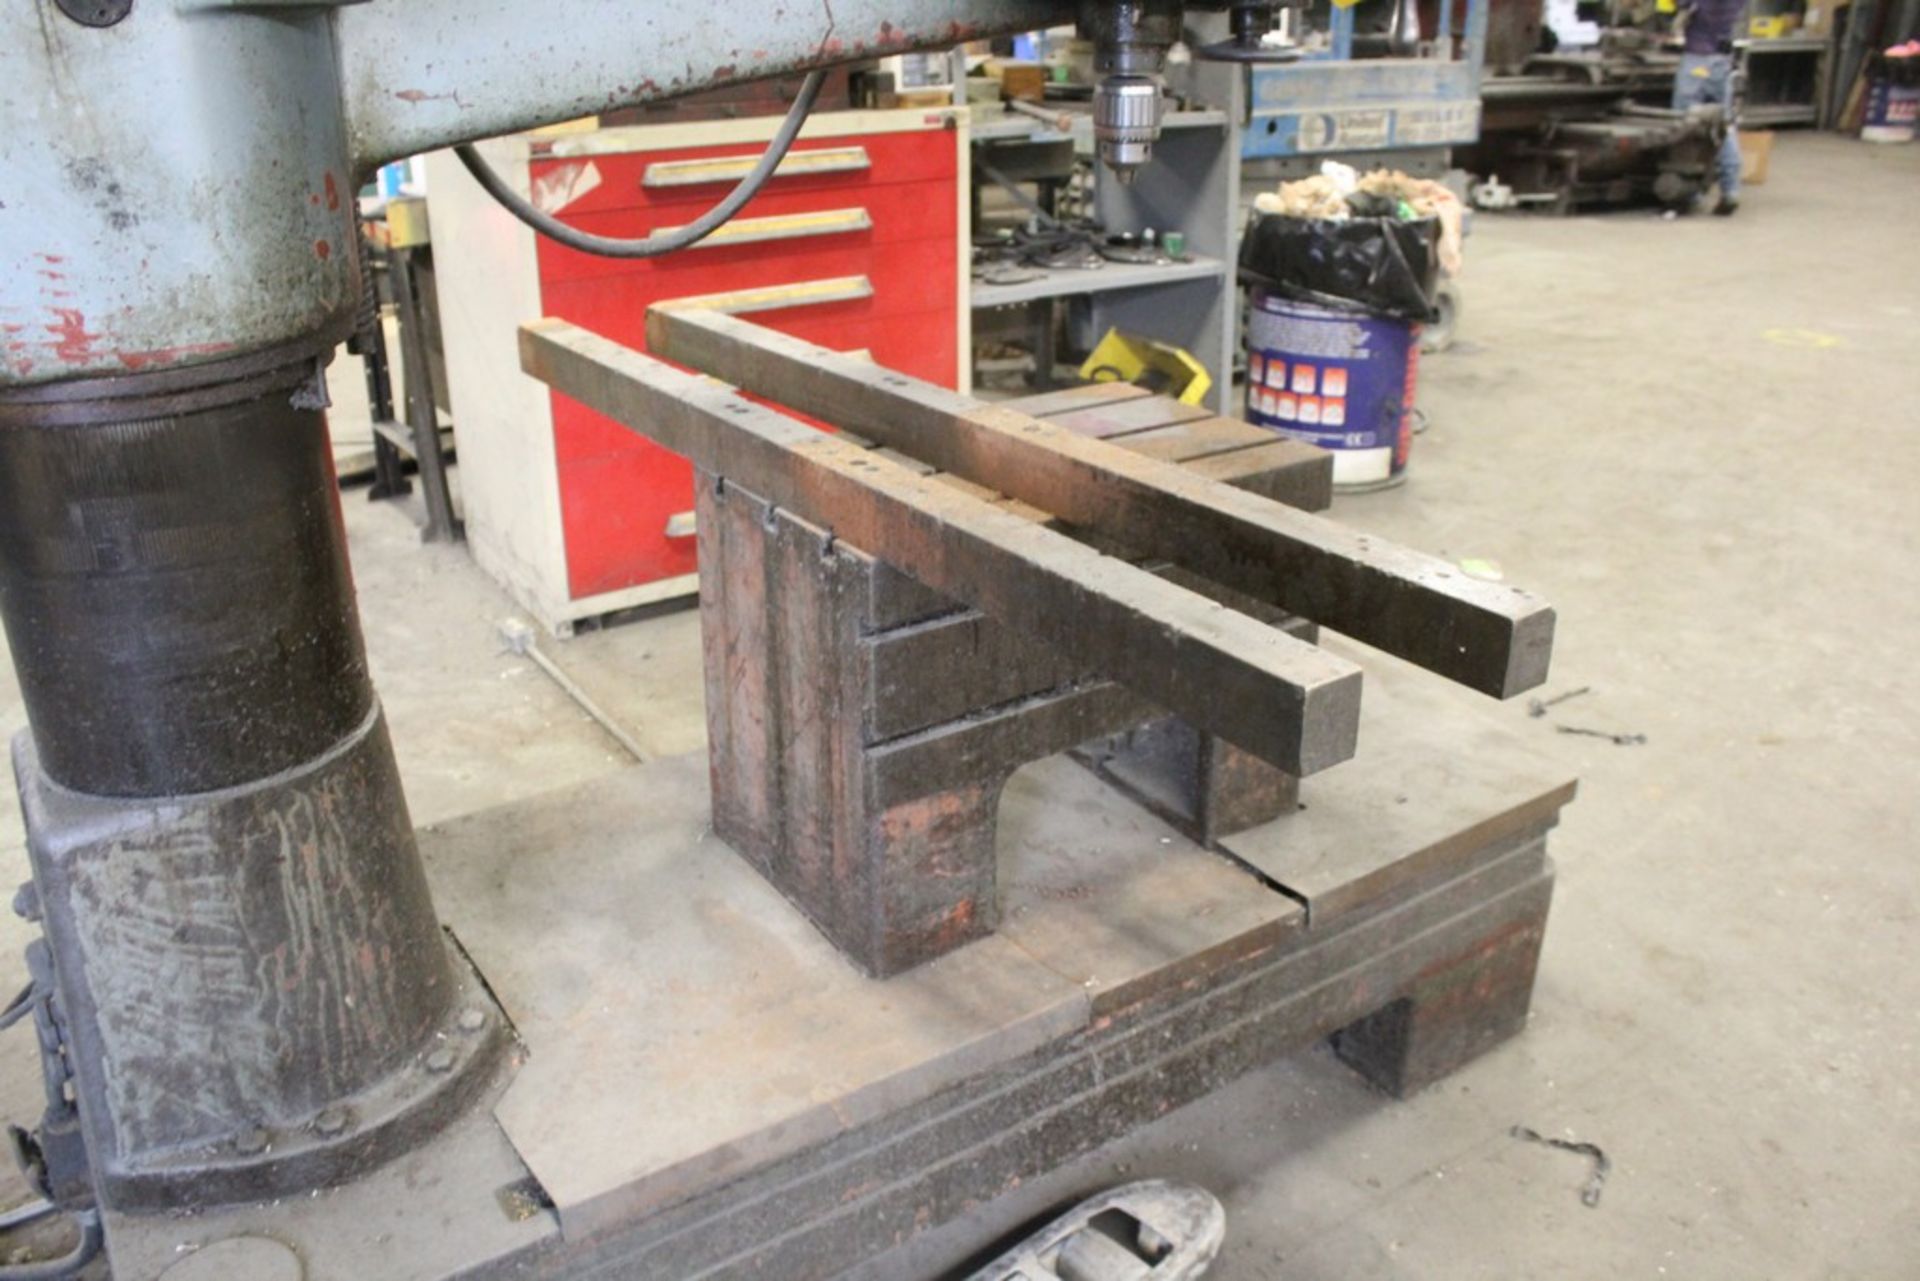 WILTON 4’ ARM 12” COLUMN RADIAL ARM DRILL WITH BOX TABLE Loading Fee: $300 - Image 5 of 7